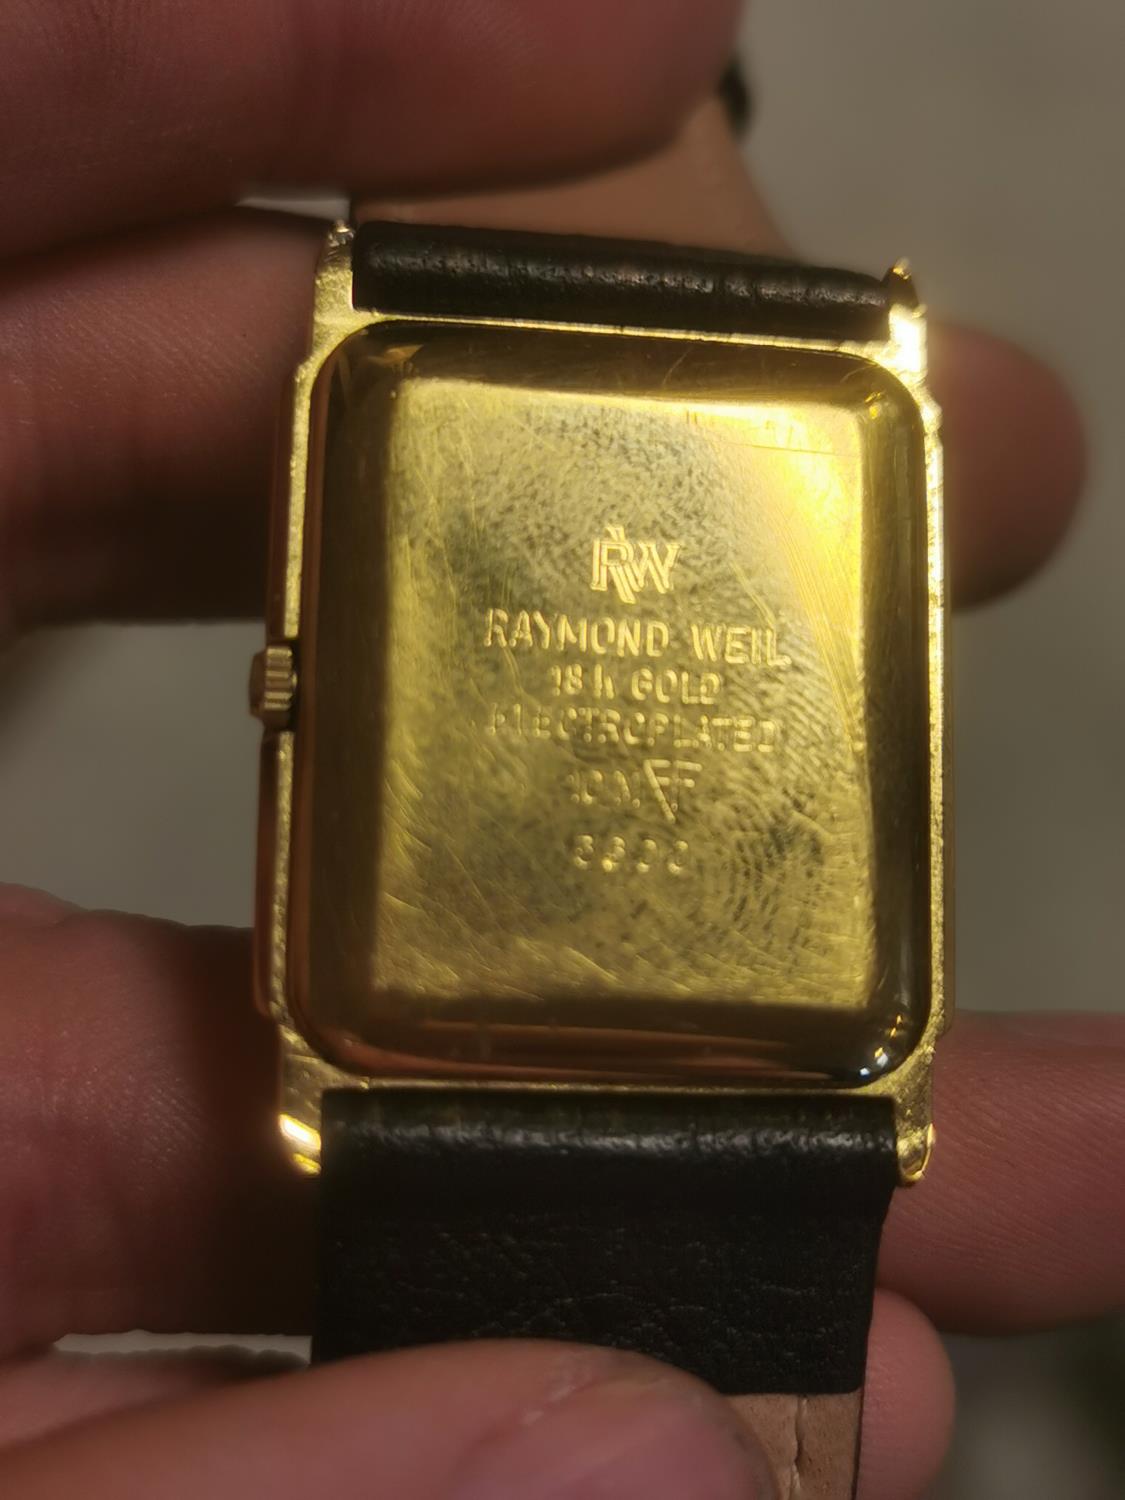 Raymond Weil 18ct Gold Plated Wristwatch - Image 3 of 3